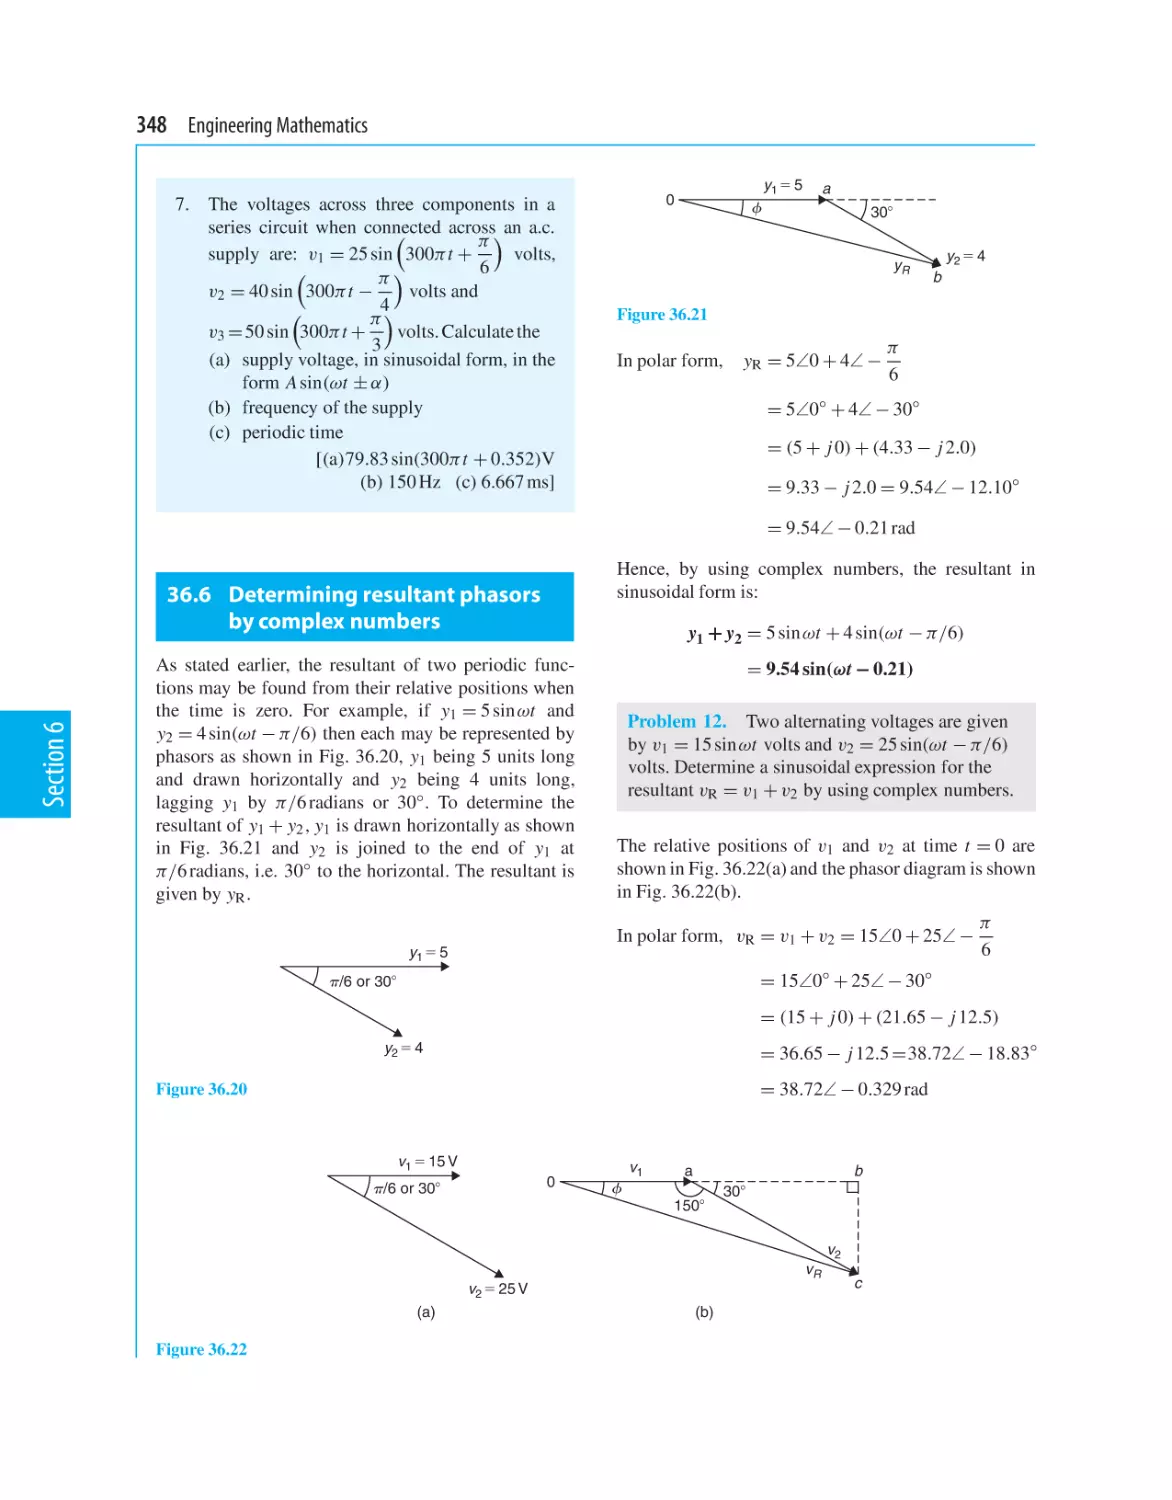 36.6 Determining resultant phasors by complex numbers